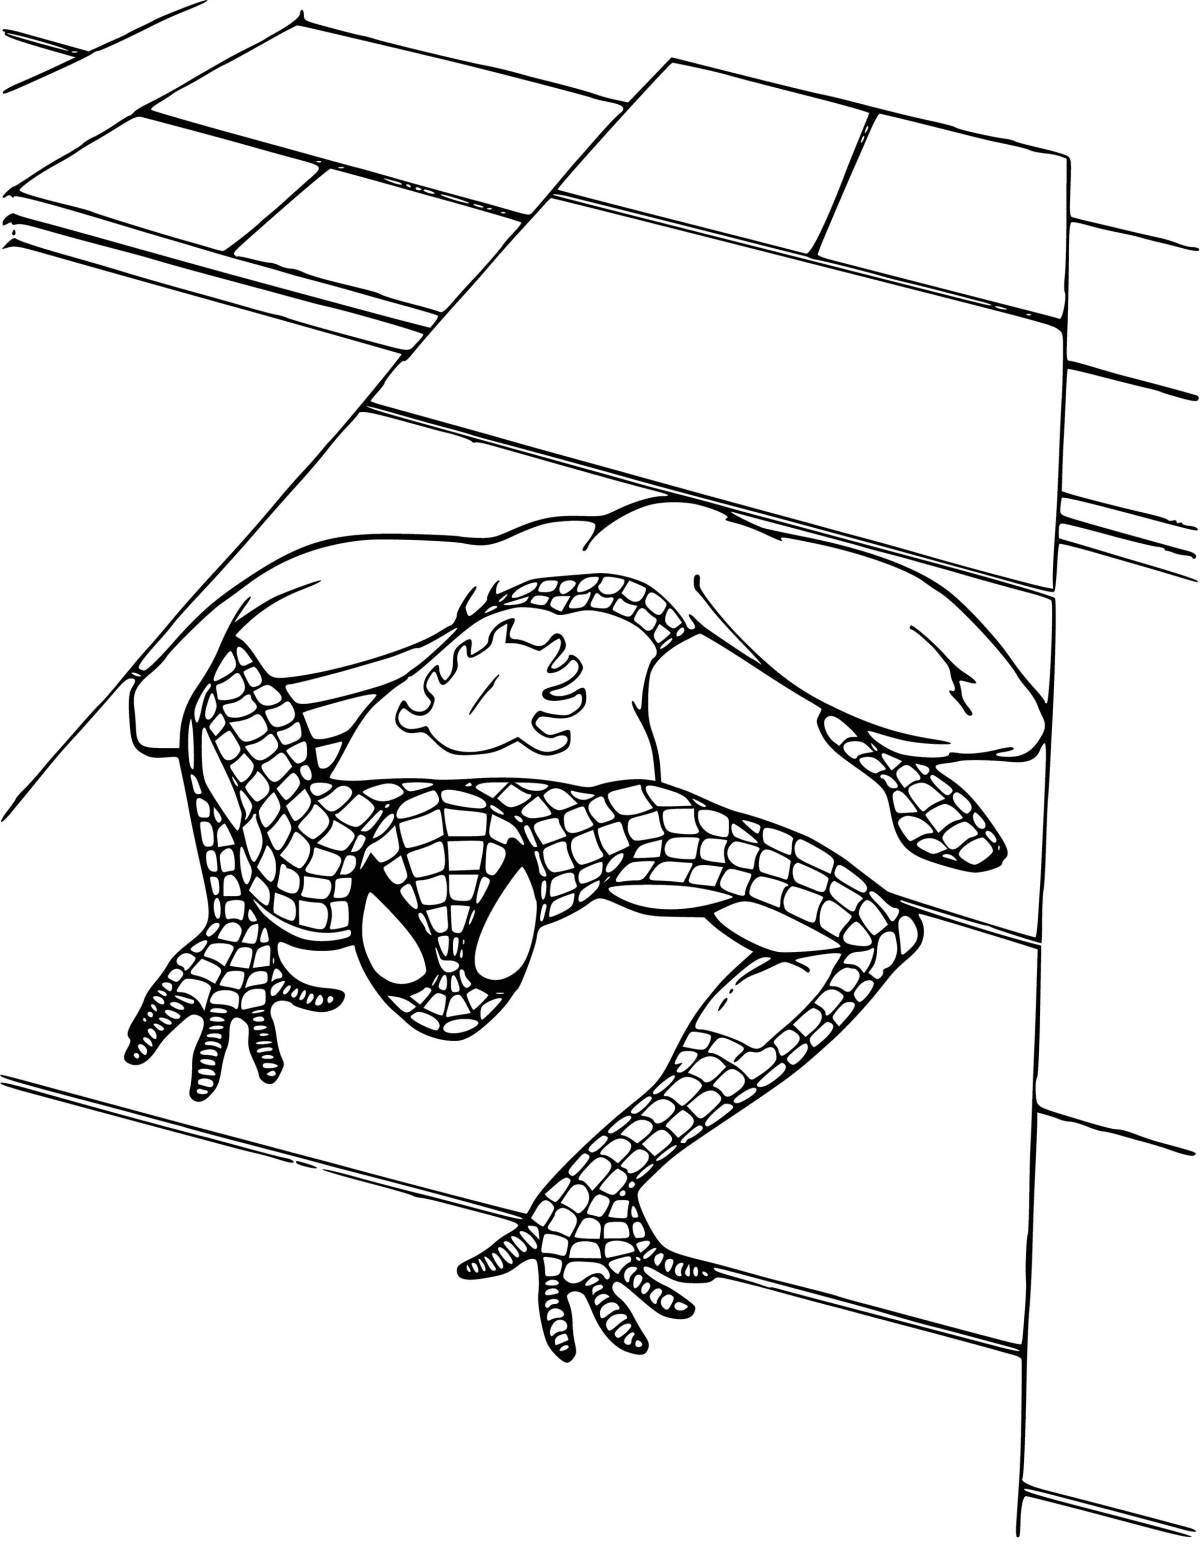 Adorable Spiderman Coloring Page for Kids